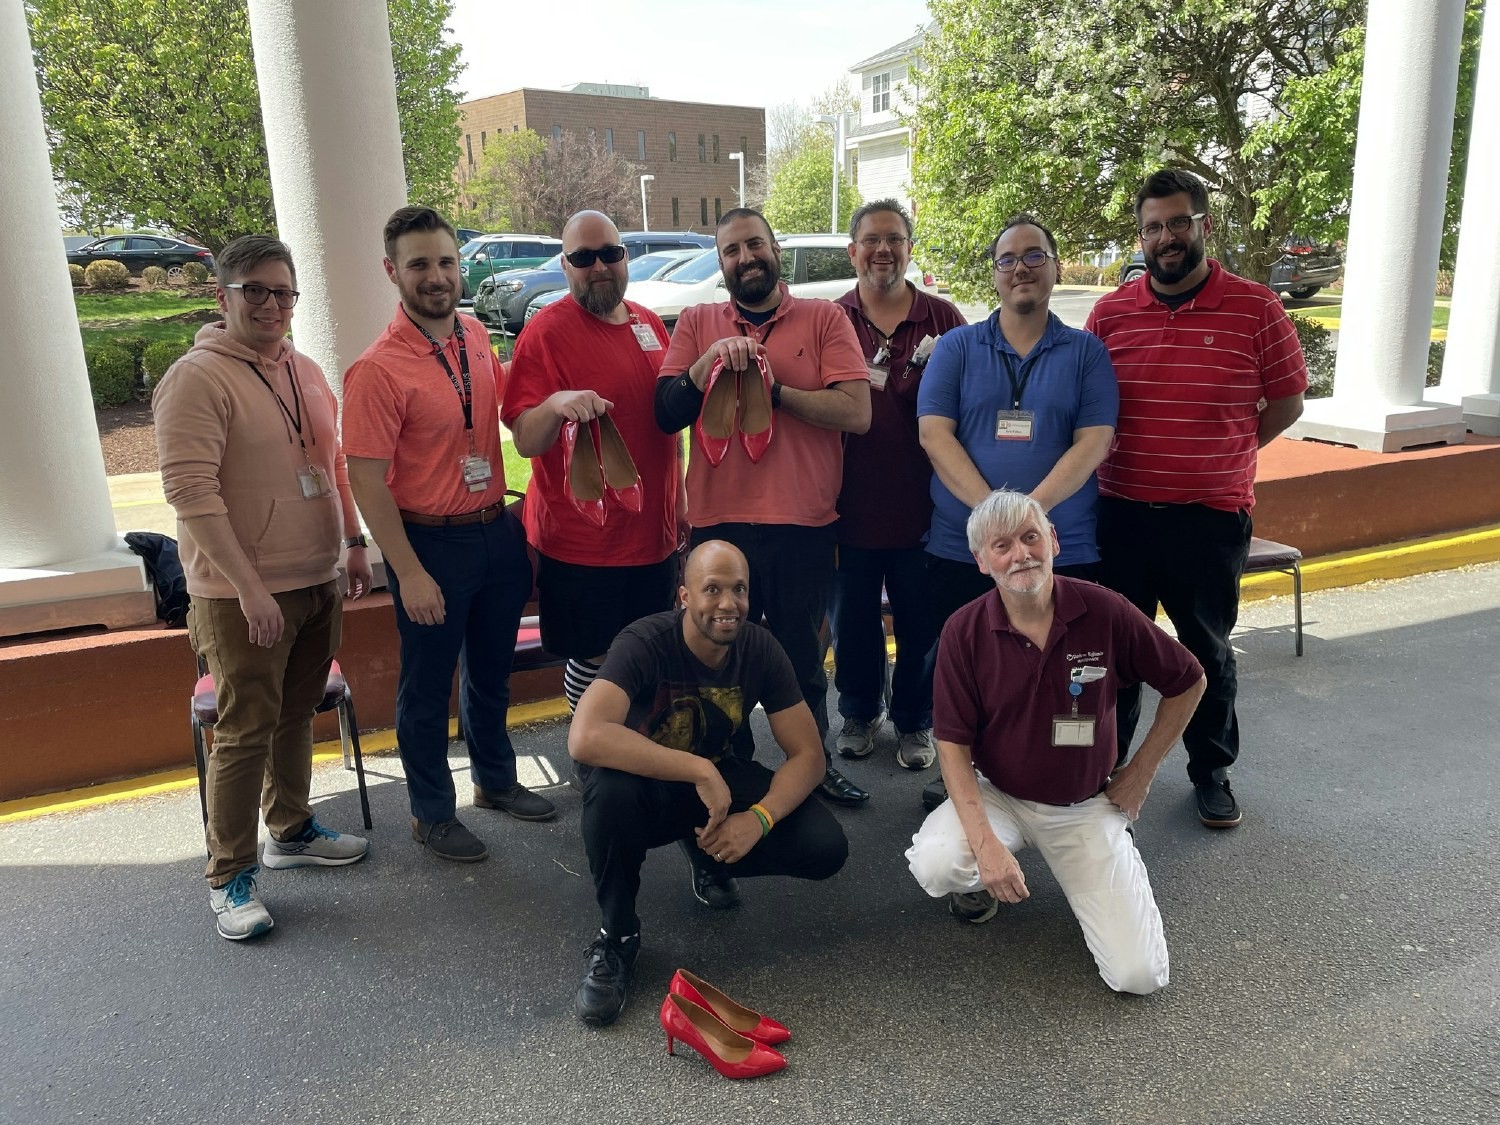 Employees volunteer to walk in red heels for the Walk a Mile event to raise proceeds for the Blackburn Center